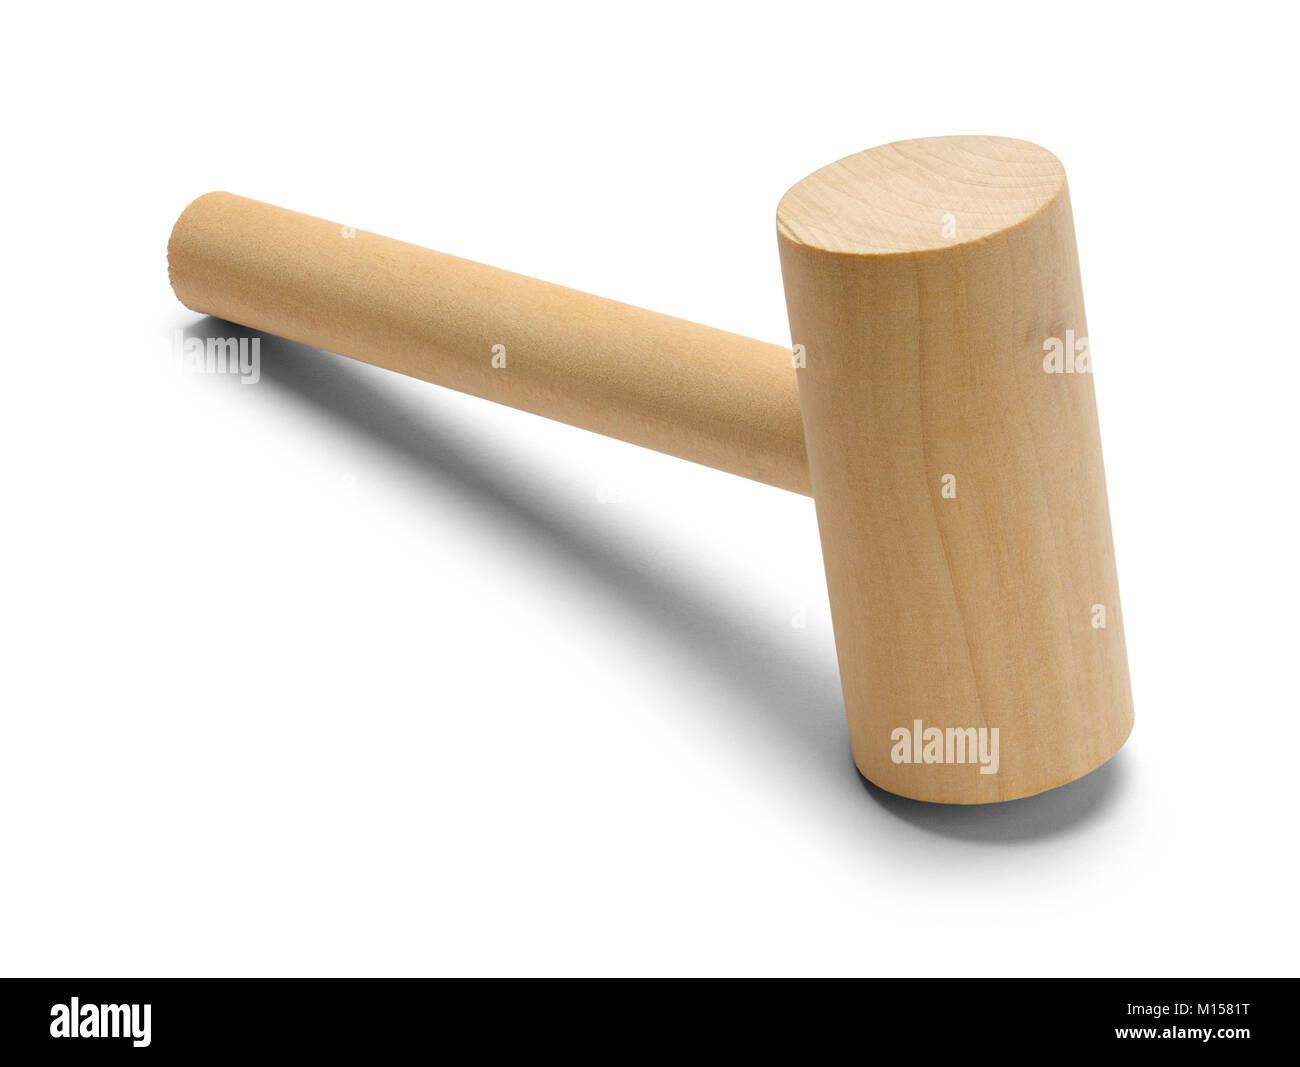 Small Wooden Mallet Isolated on a White Background. Stock Photo